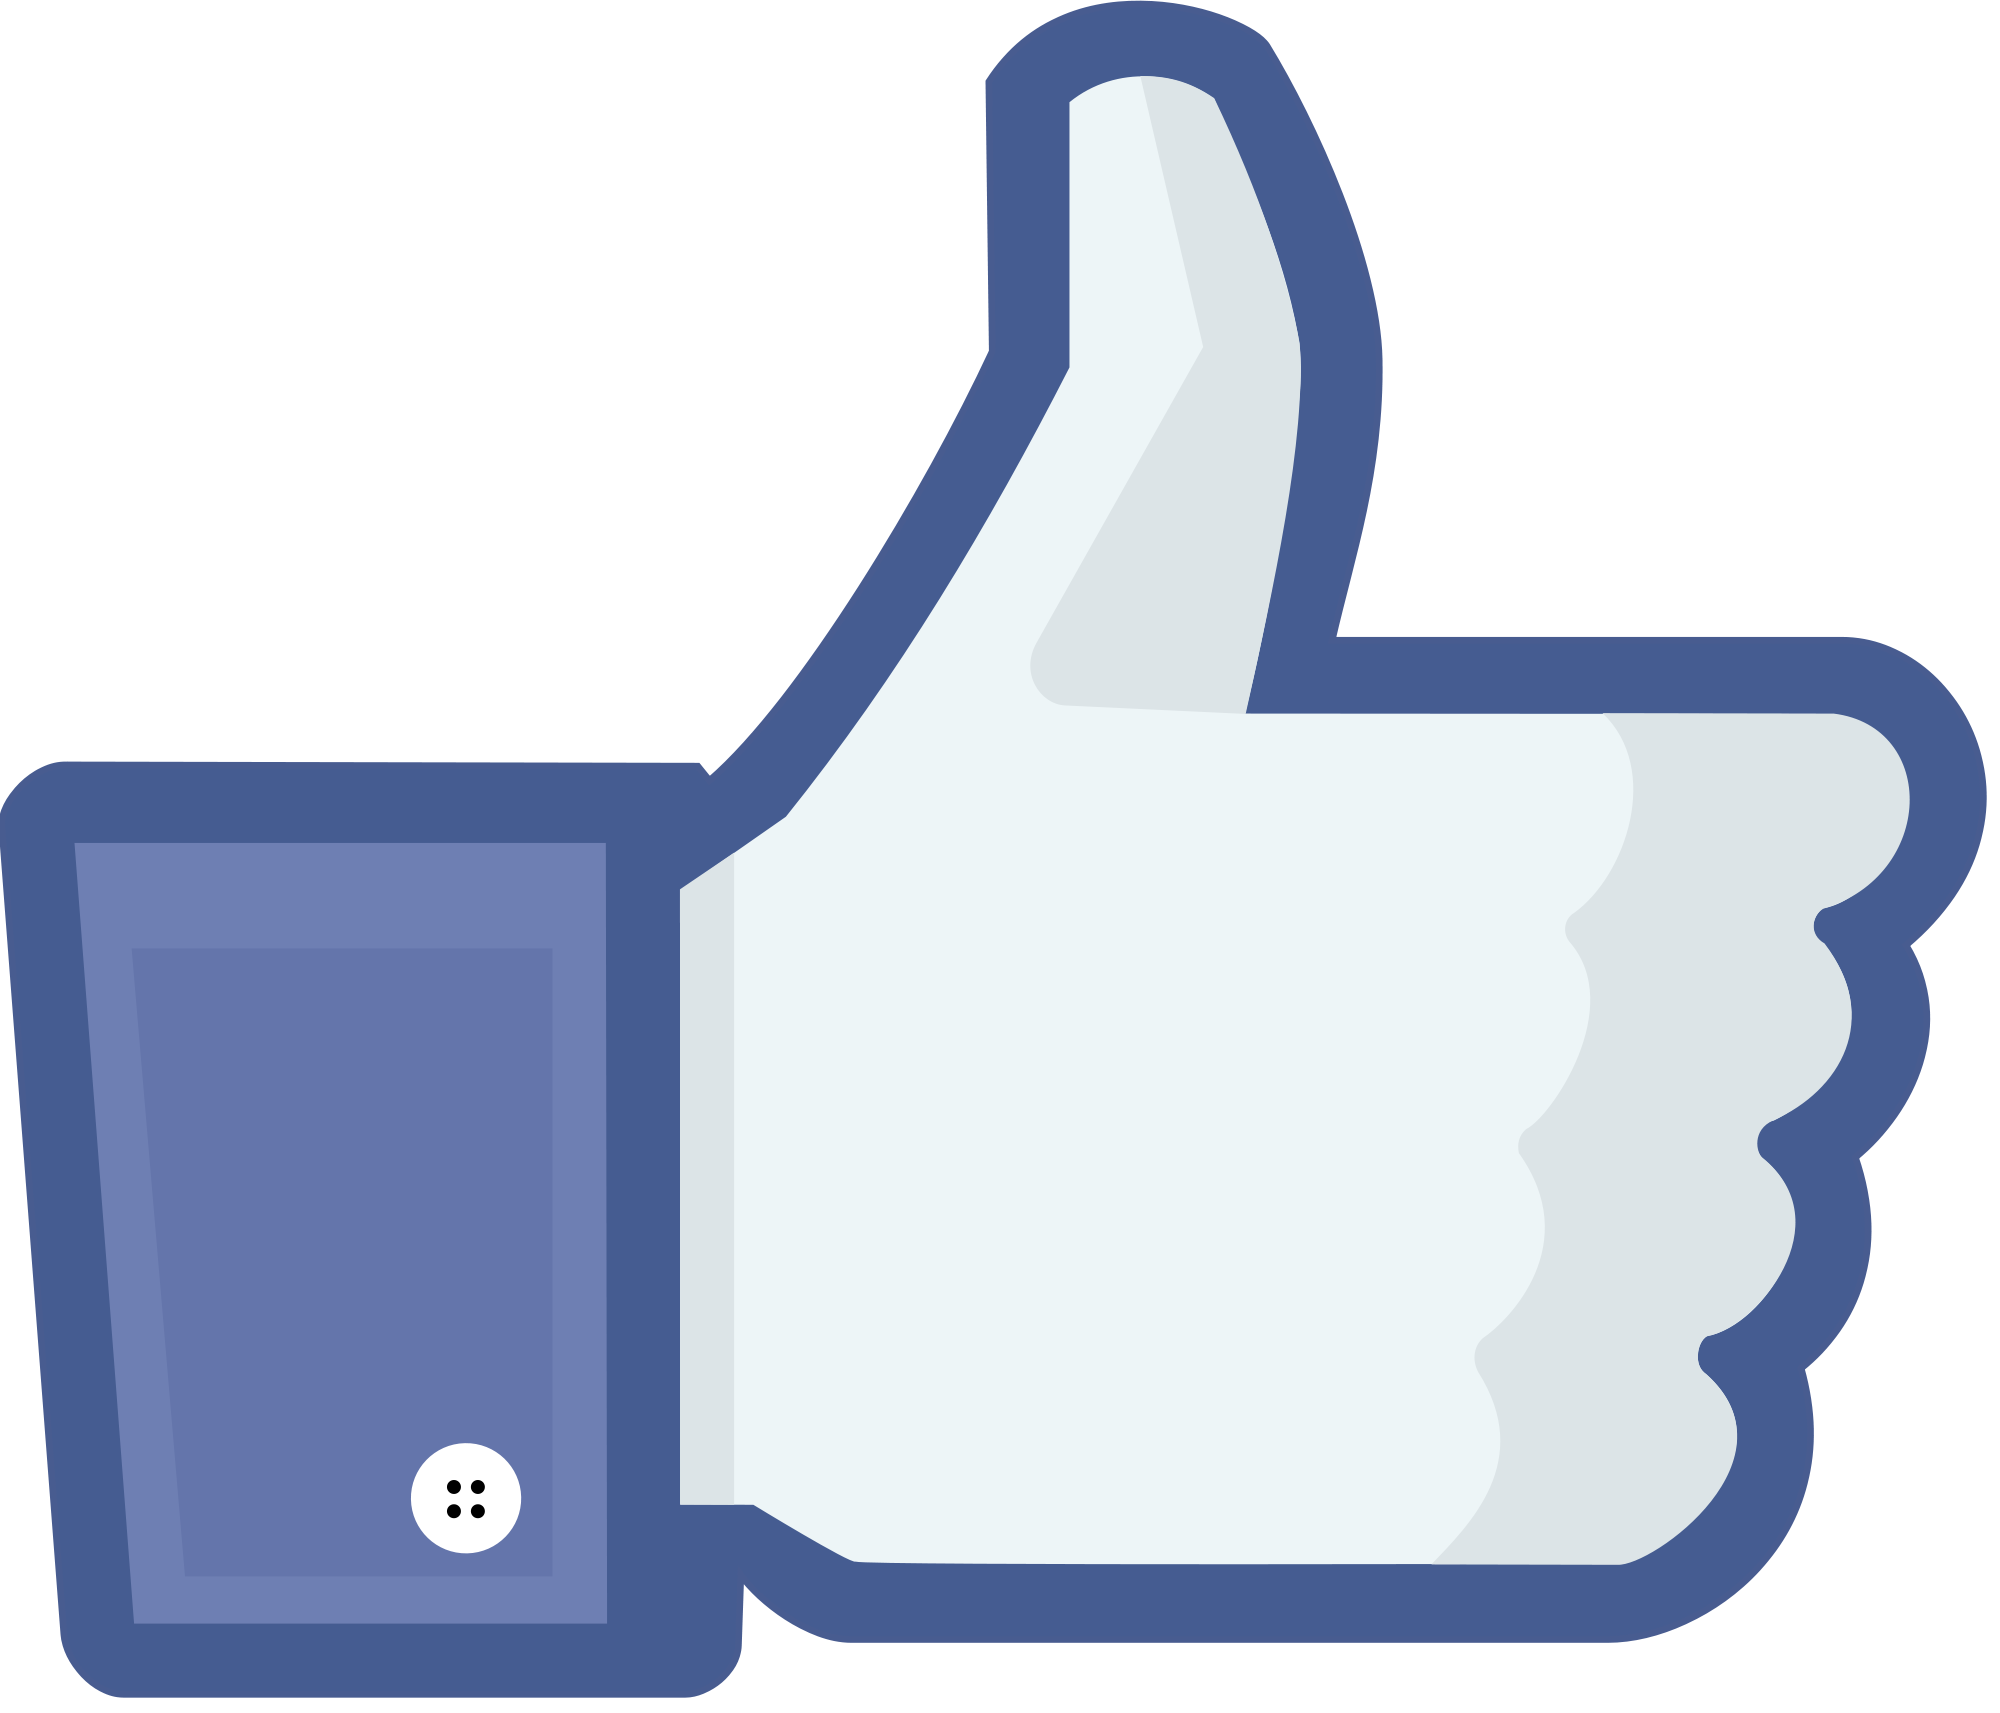 Mass Invites to Like Your Facebook Page